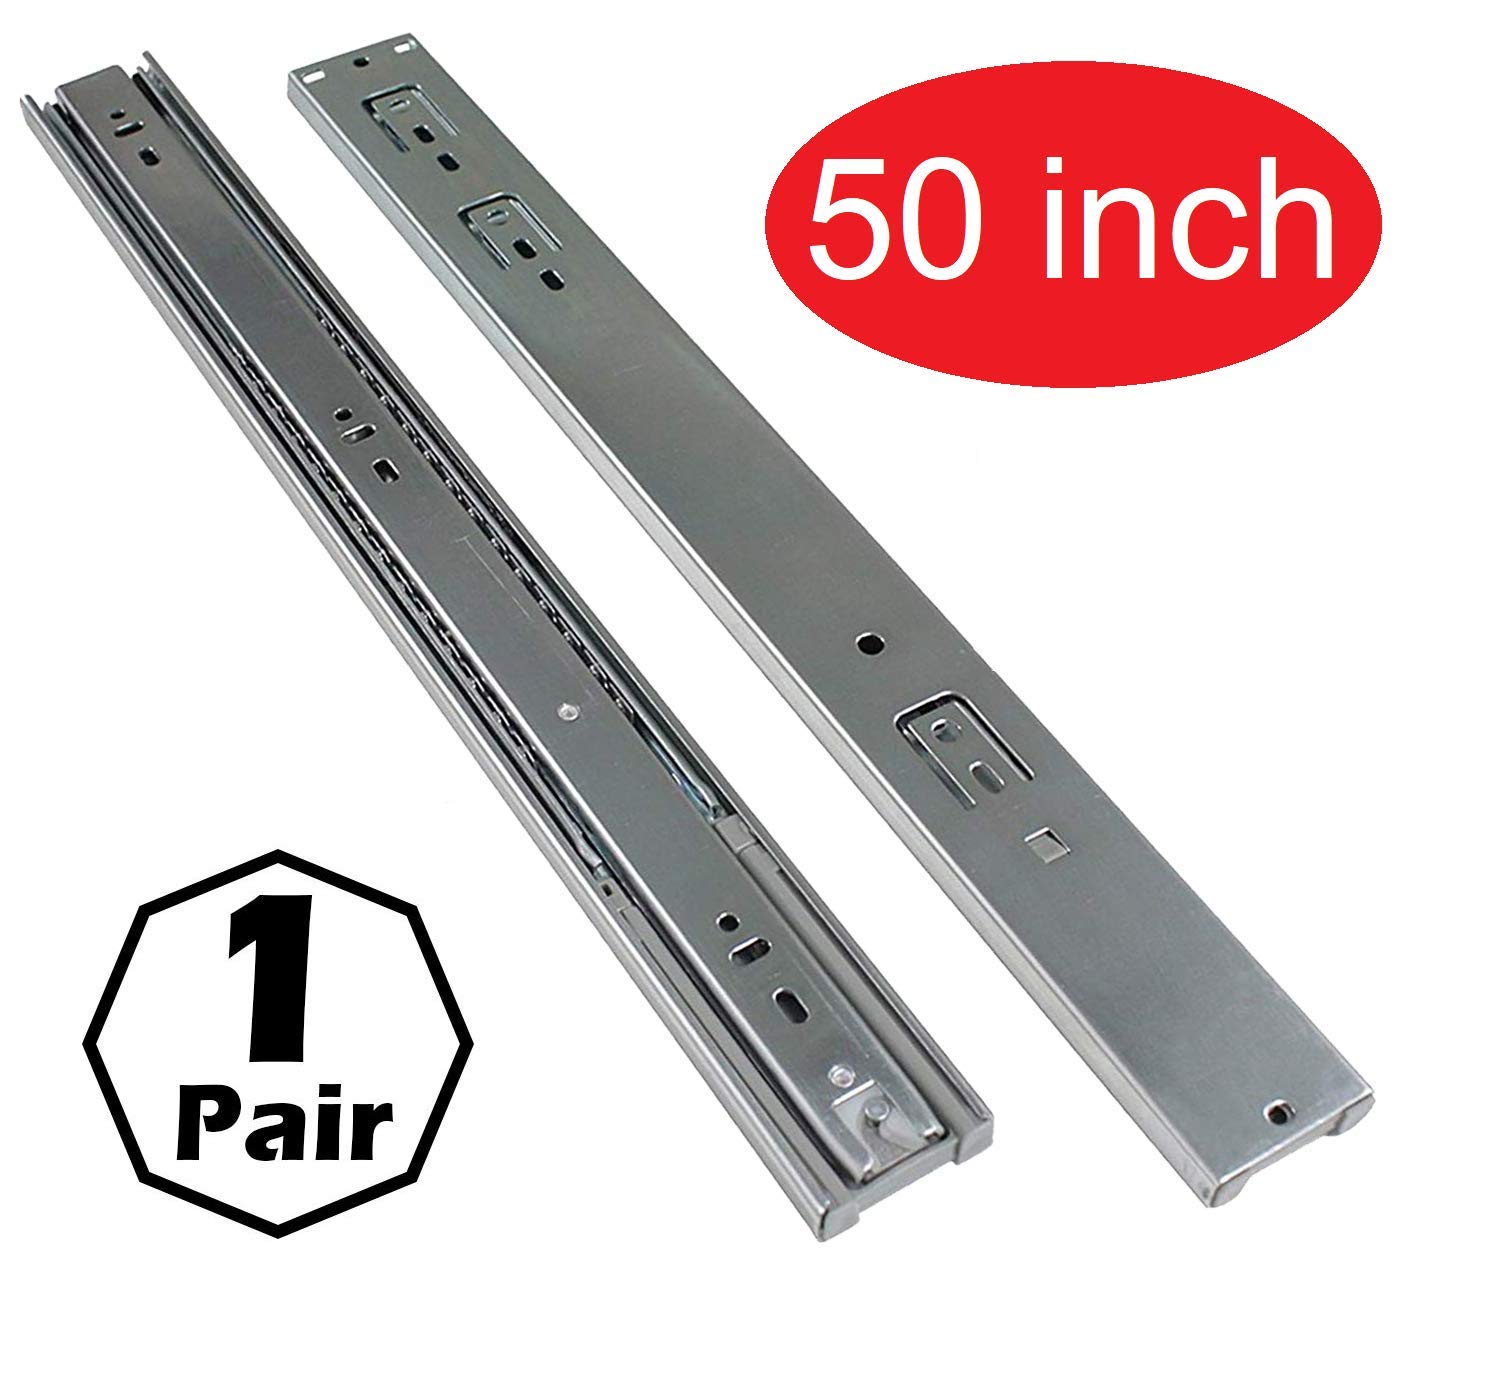 Firgelli Automations 50 inch Extension Guide Rail